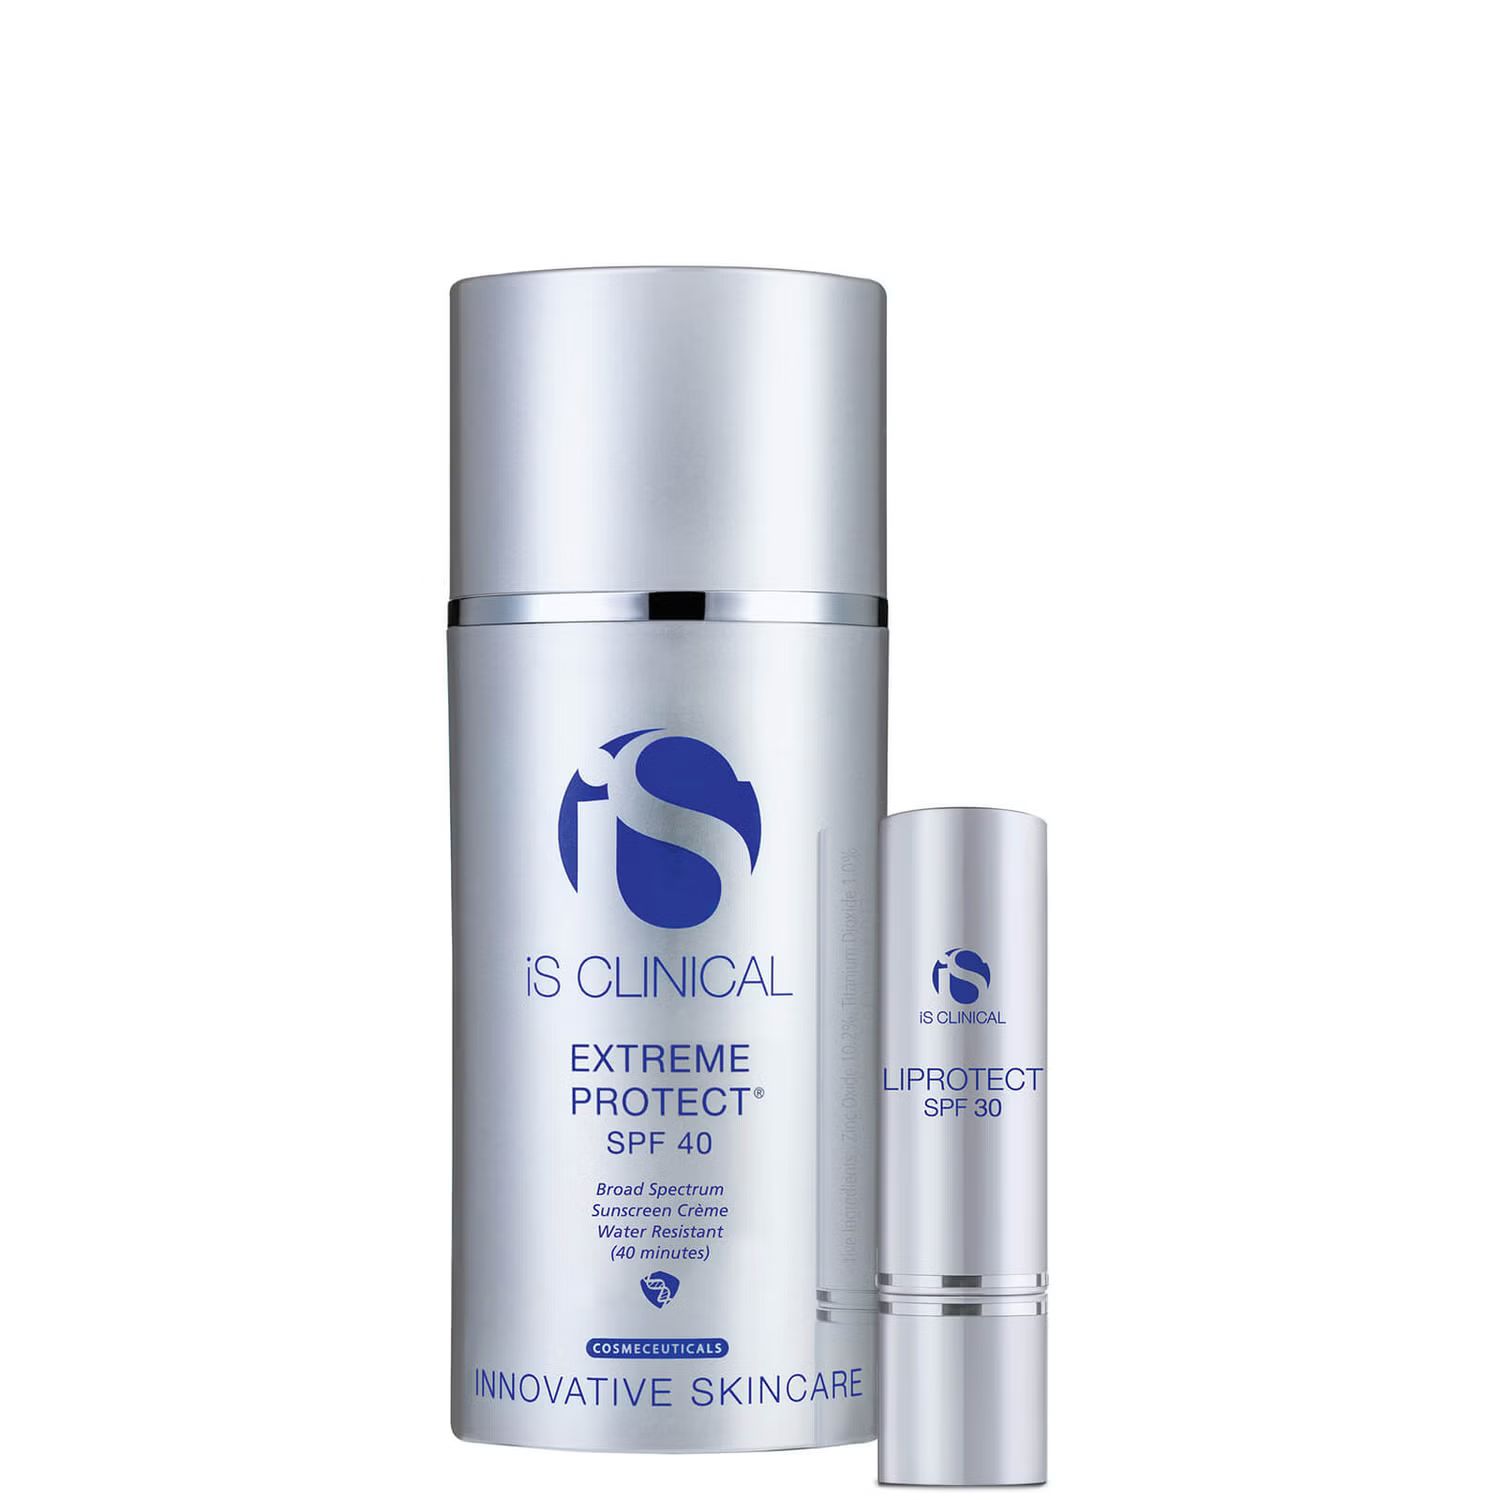 iS Clinical Ultimate Protection Duo 2 piece - $108 Value | Dermstore (US)